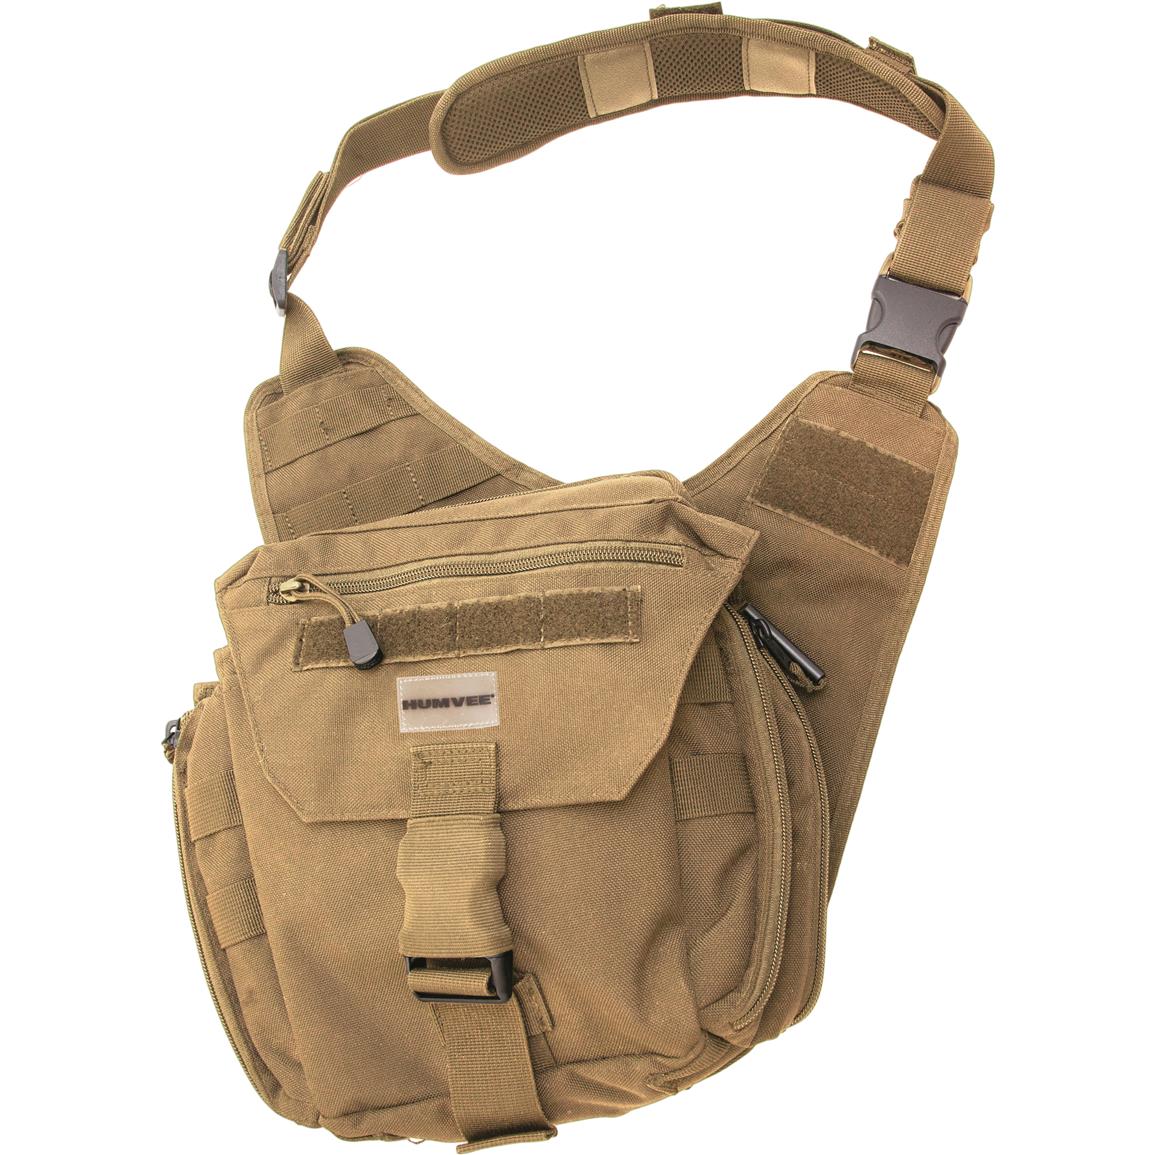 Humble Shoulder Bag - 675973, Military Style Backpacks & Bags at Sportsman&#39;s Guide